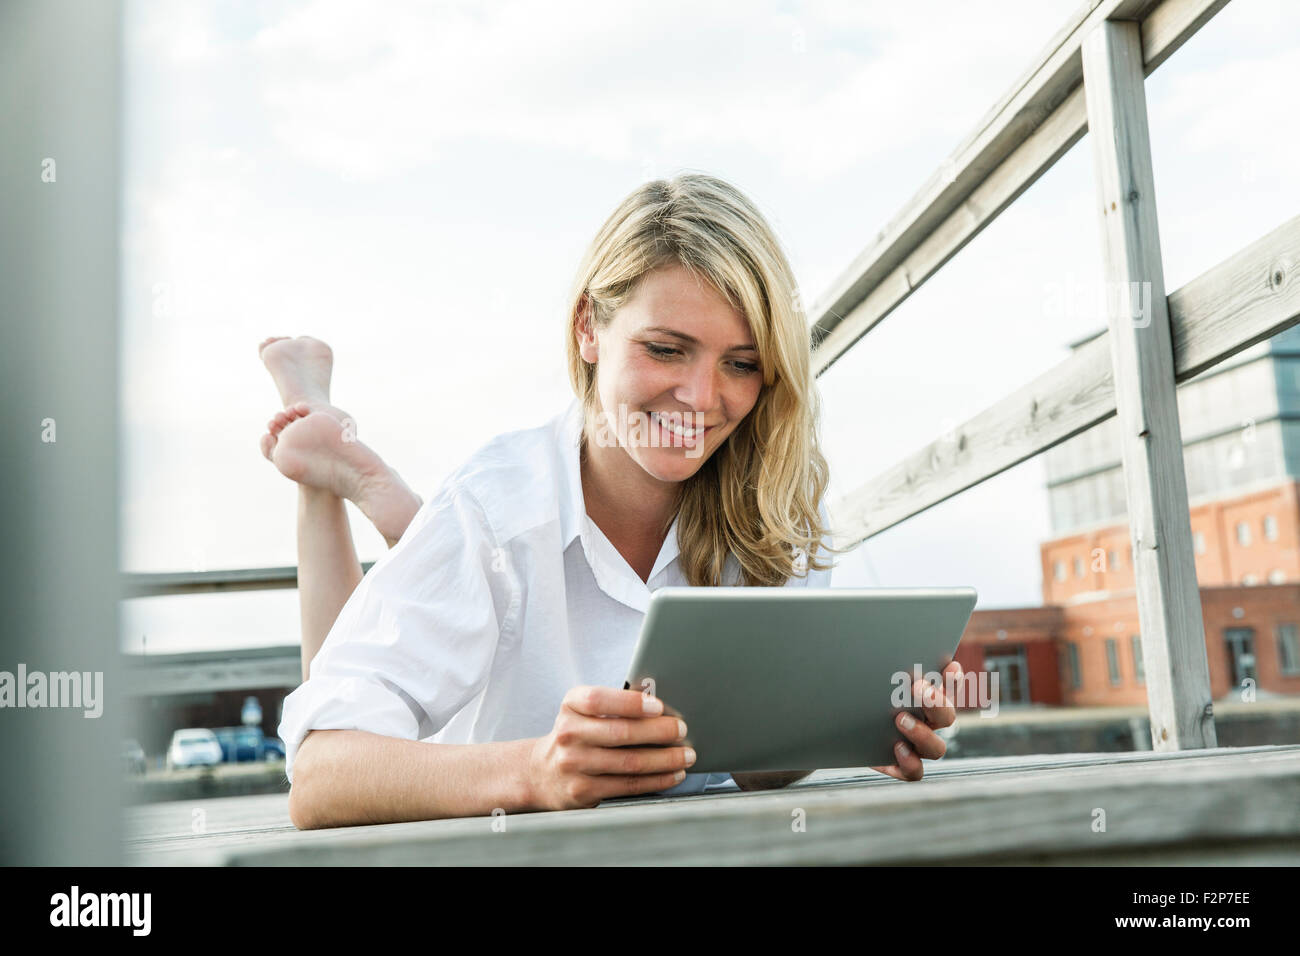 Smiling young woman relaxing on deck using digital tablet Stock Photo